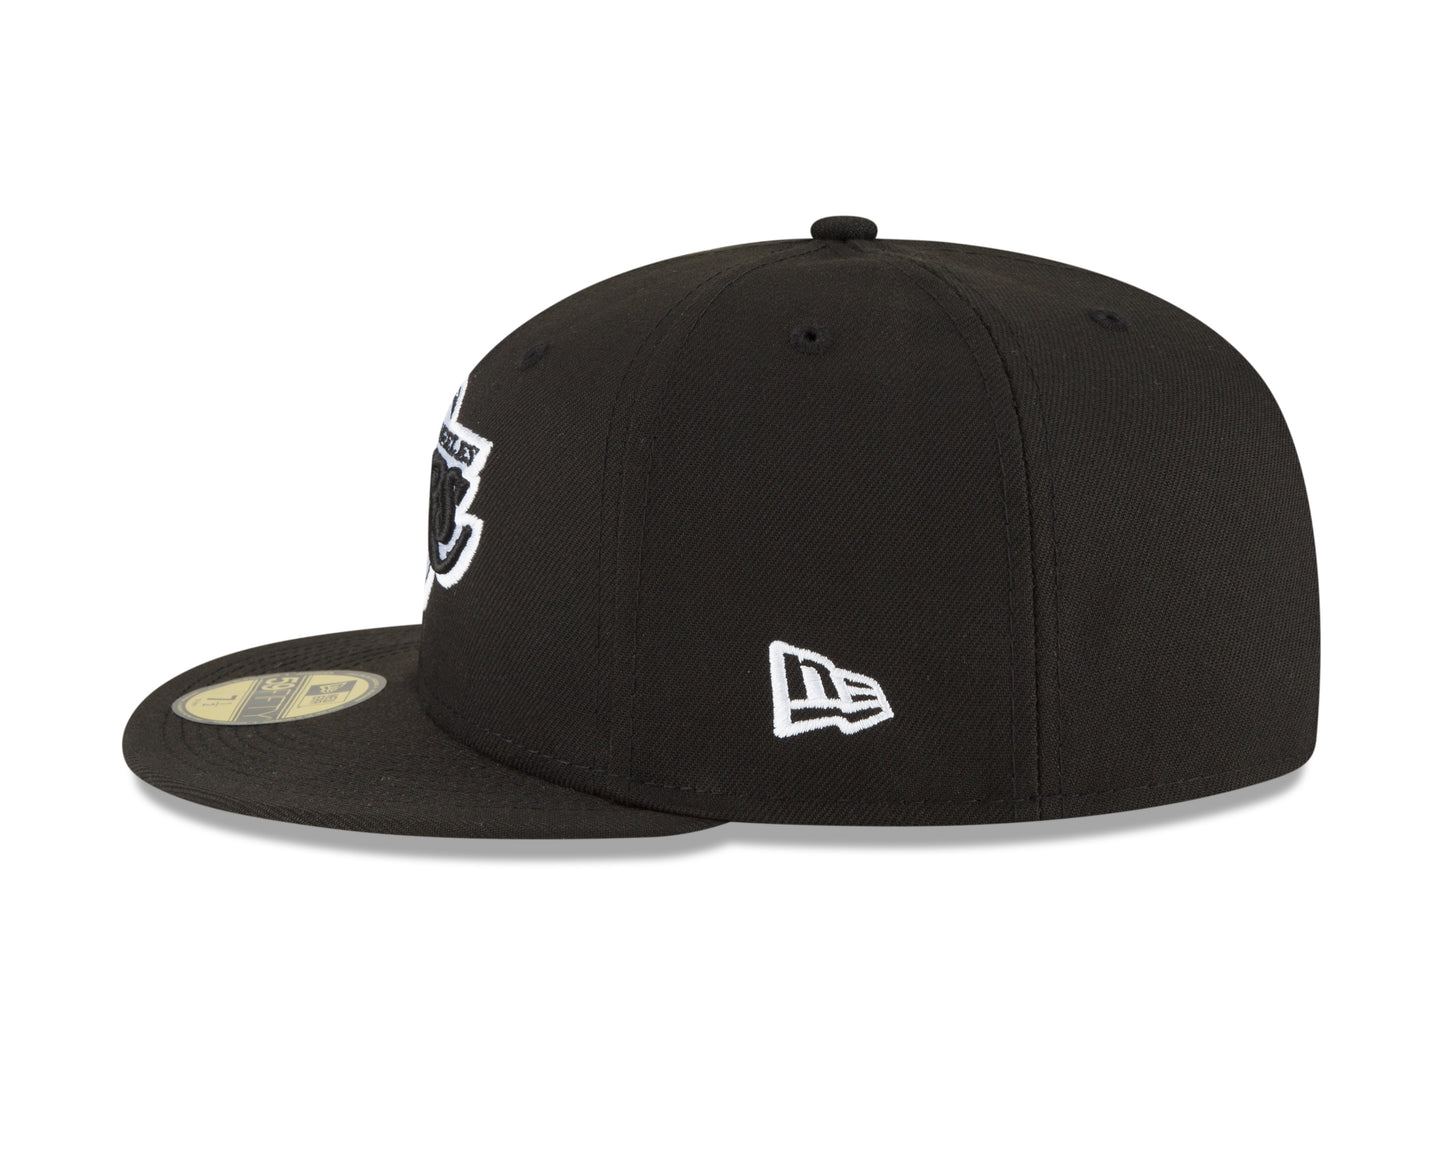 Los Angeles Lakers New Era Black and White Back Half 59fifty Fitted Hat